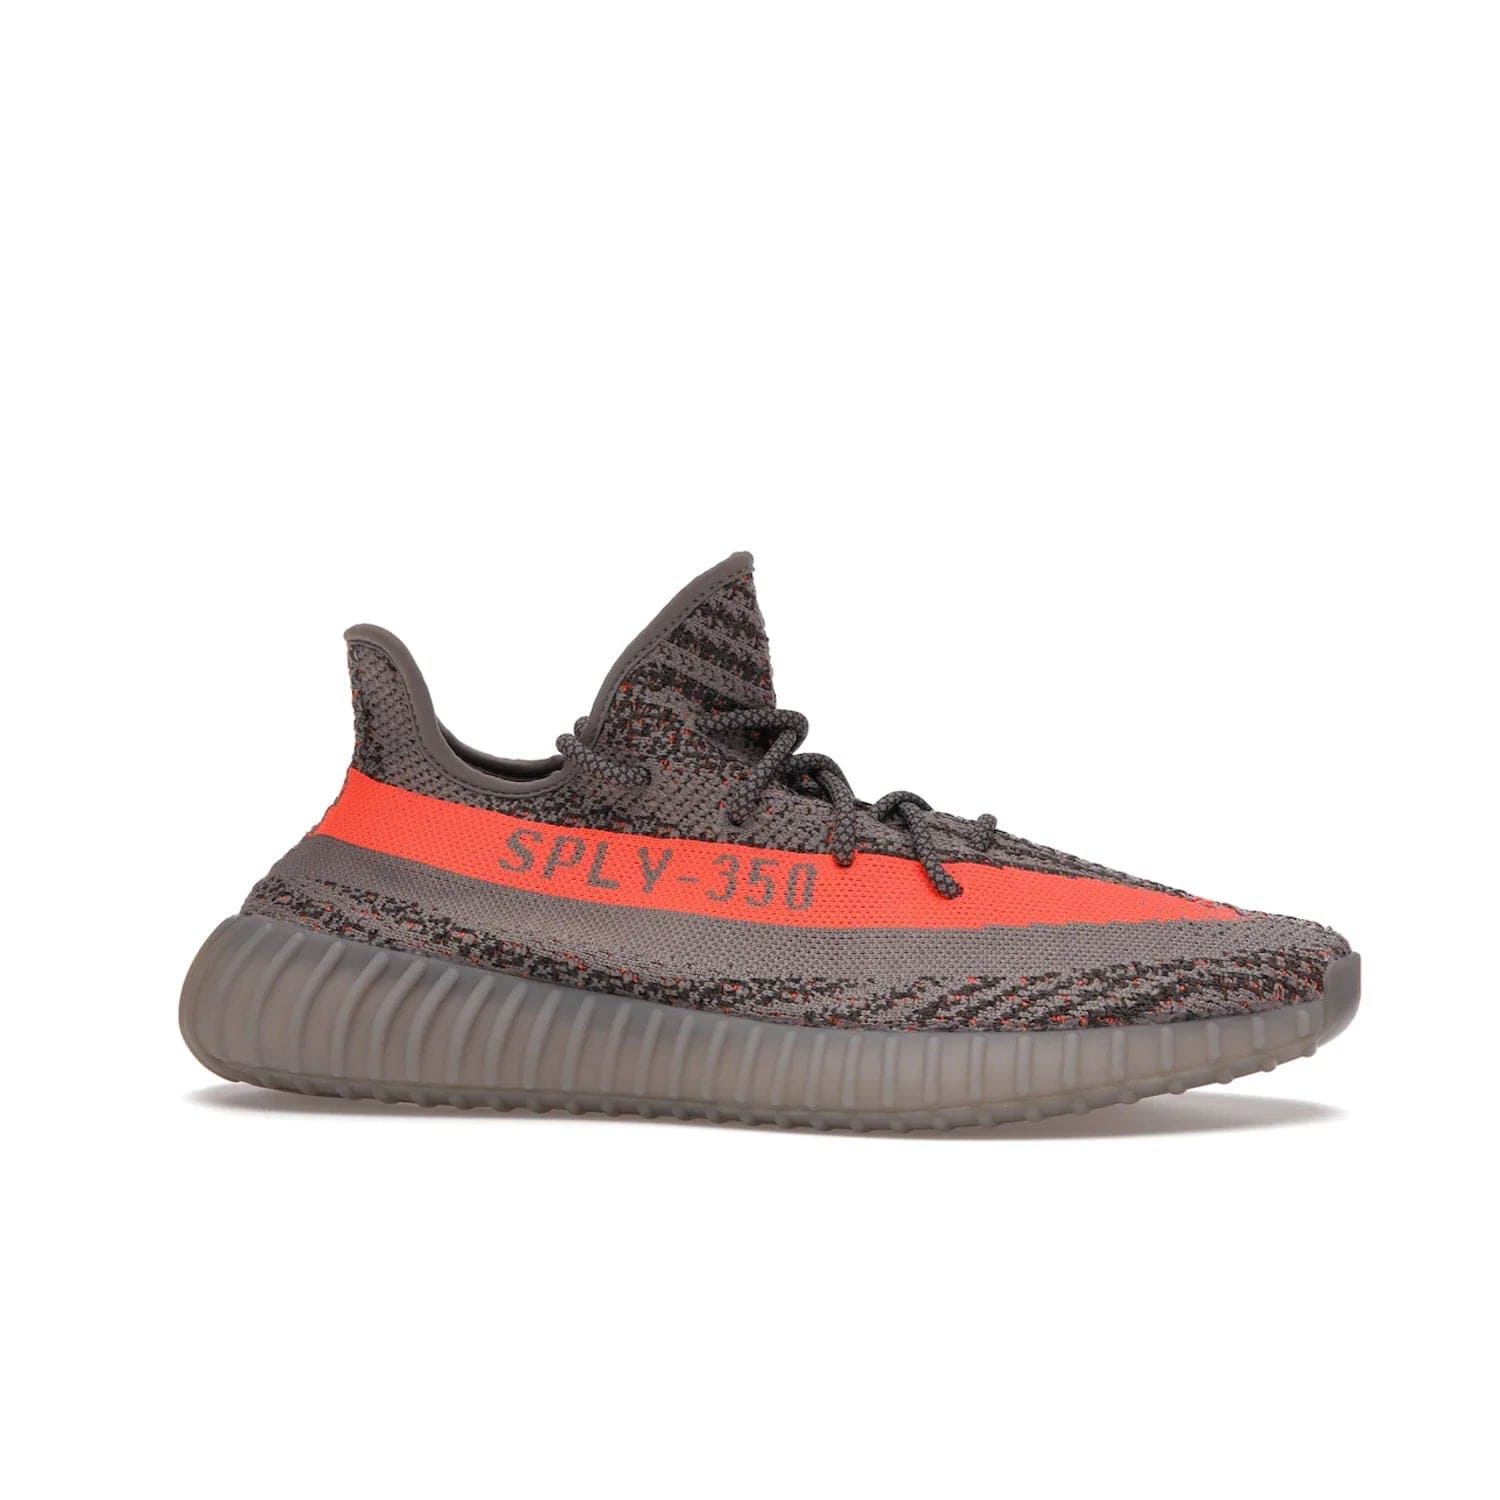 adidas Yeezy Boost 350 V2 Beluga Reflective - Image 2 - Only at www.BallersClubKickz.com - Shop the adidas Yeezy Boost 350 V2 Beluga Reflective: a stylish, reflective sneaker that stands out. Featuring Boost sole, Primeknit upper & signature orange stripe. Available Dec 2021.